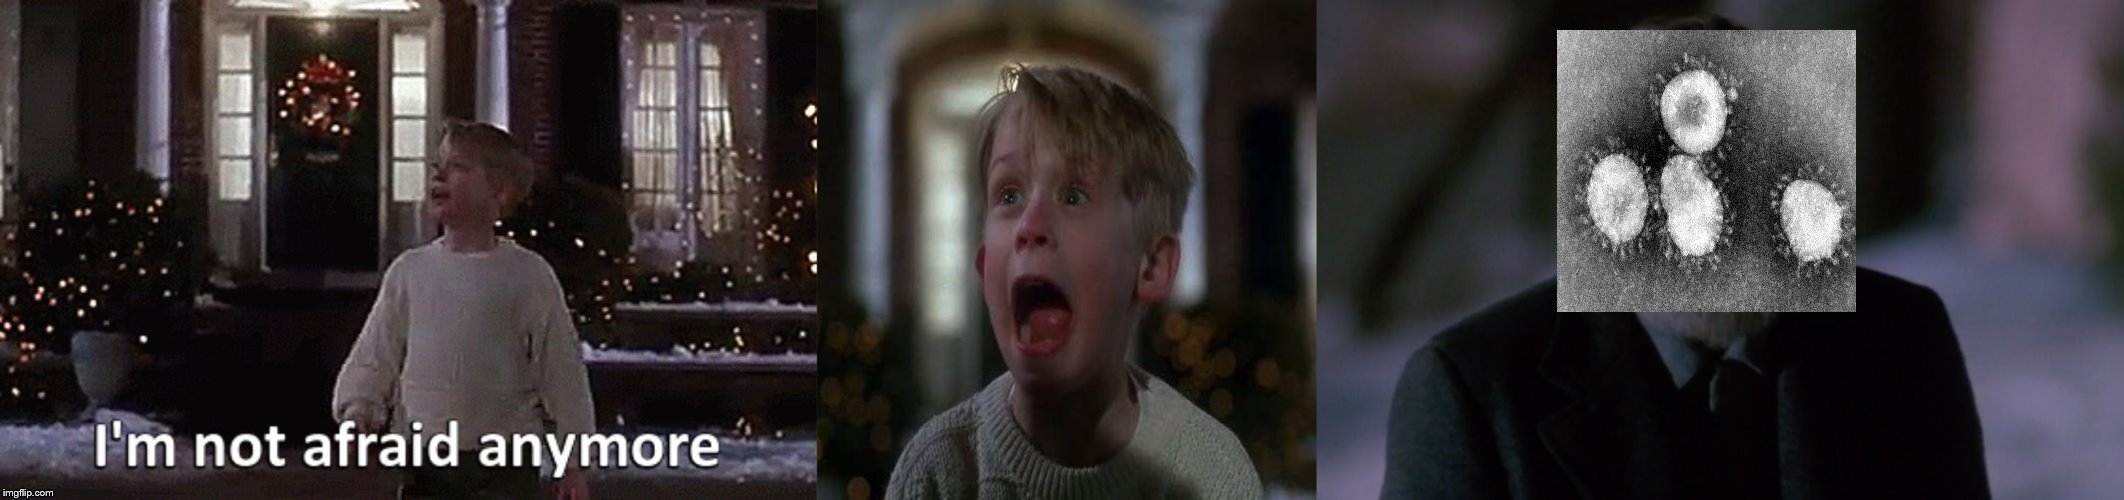 2020 be like | image tagged in memes,2020,home alone,pandemic,2021 | made w/ Imgflip meme maker